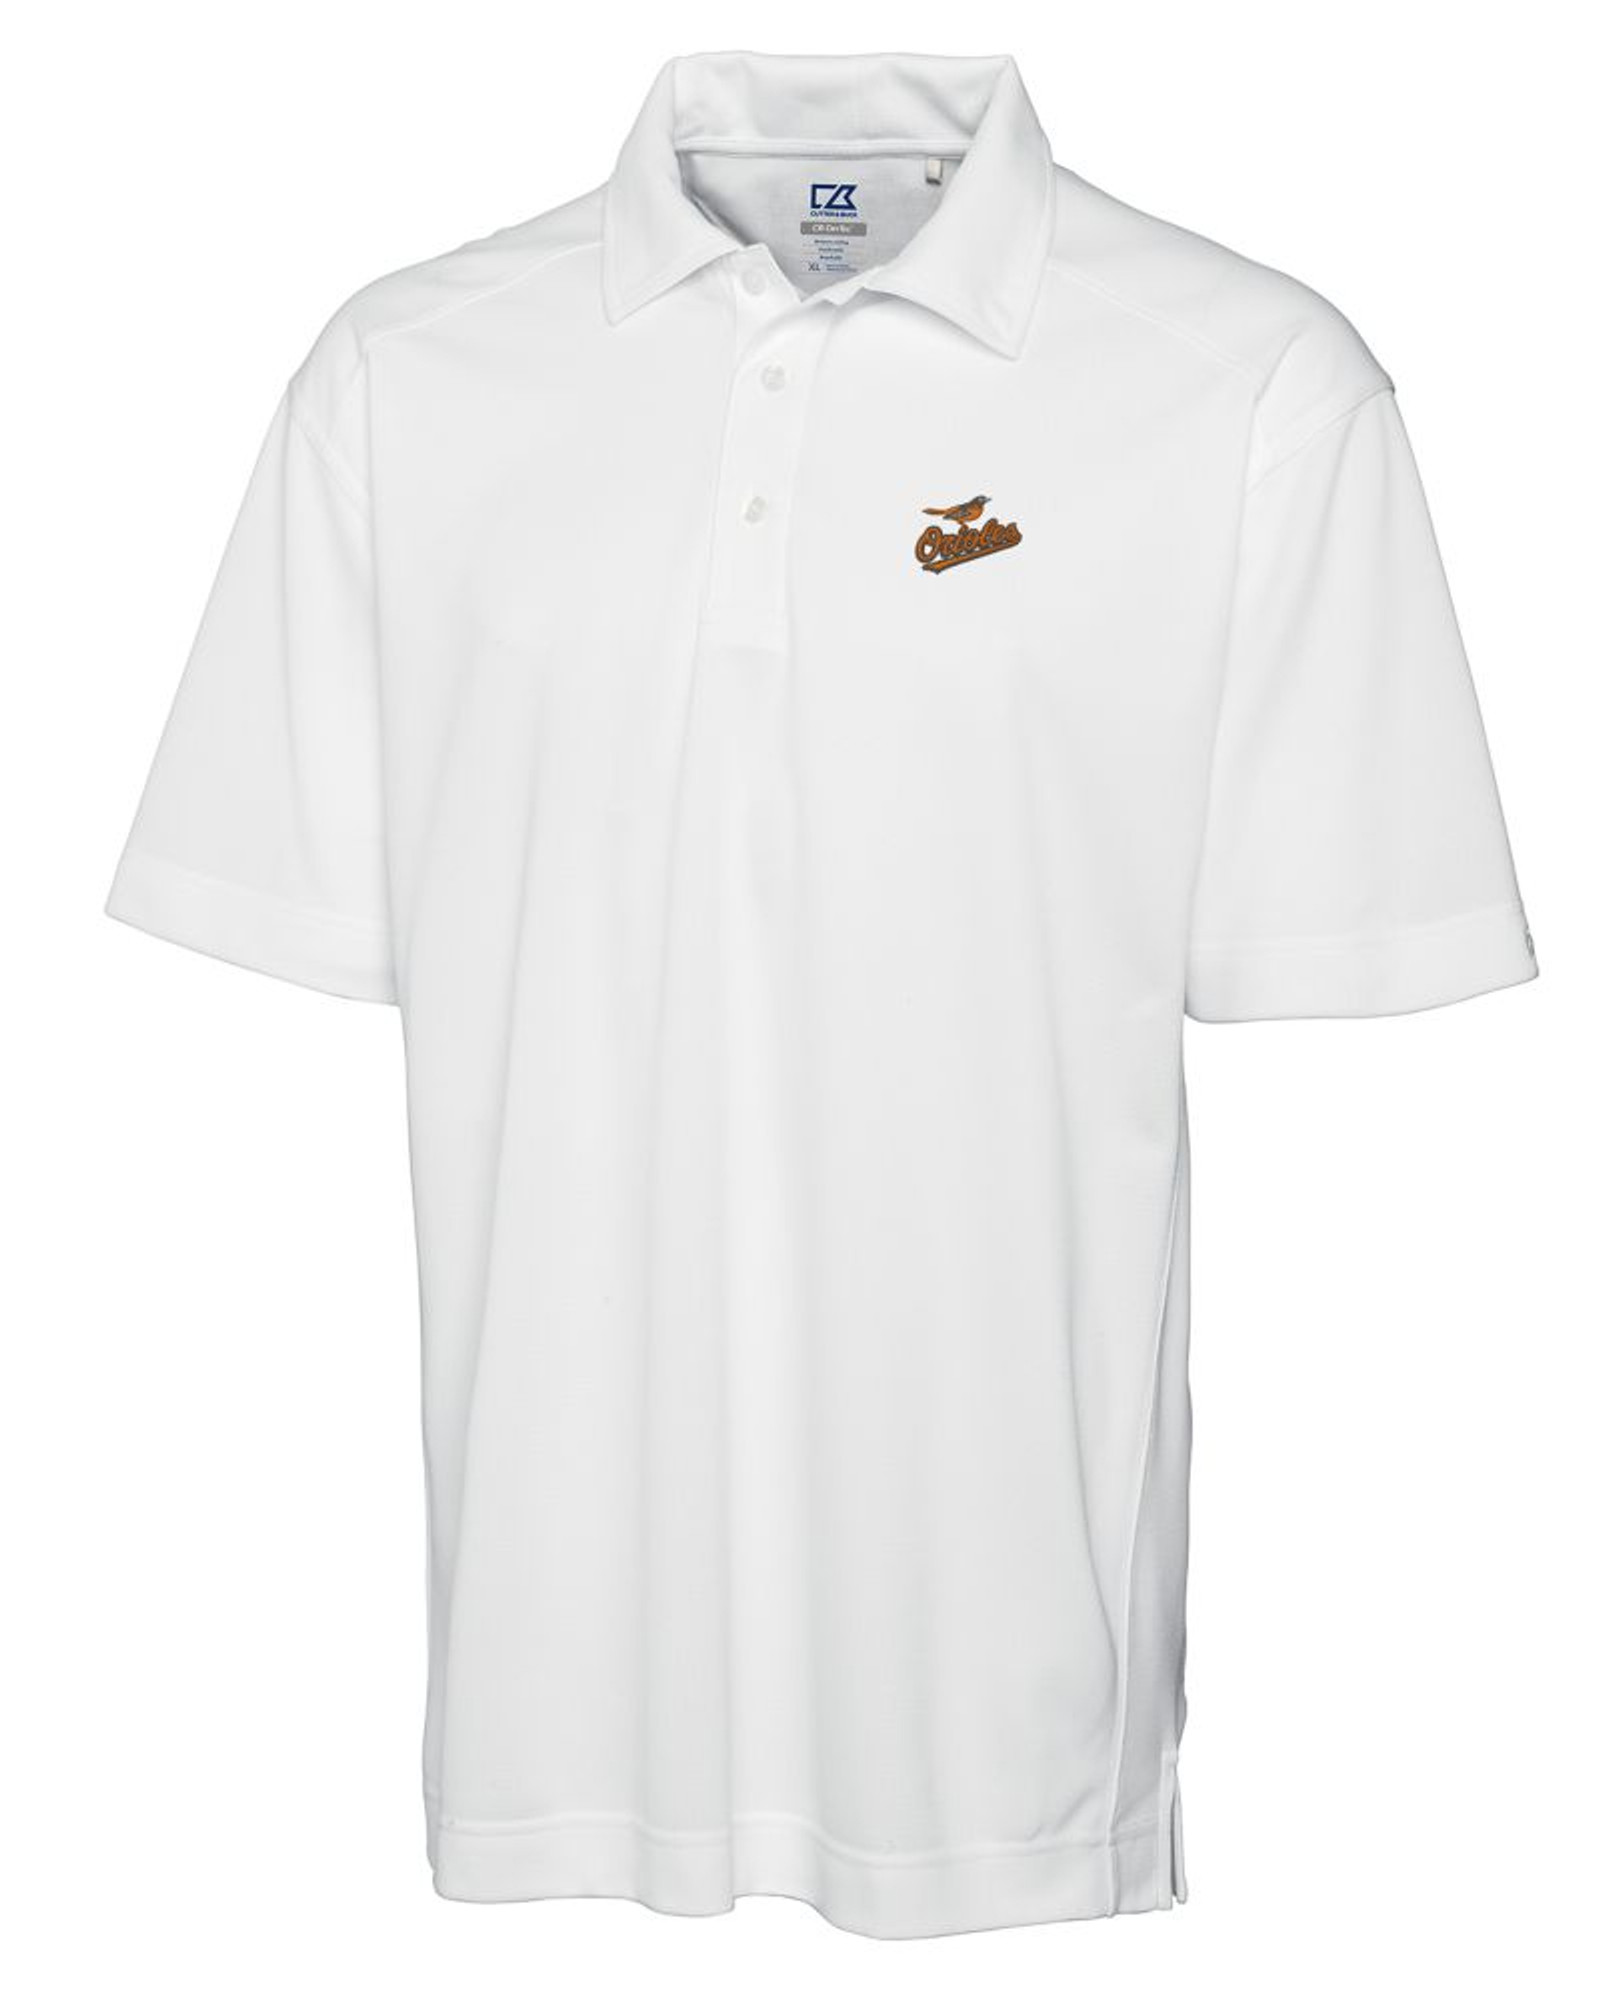 Baltimore Orioles Men’s Large UNDER ARMOUR golf polo shirt BRAND NEW